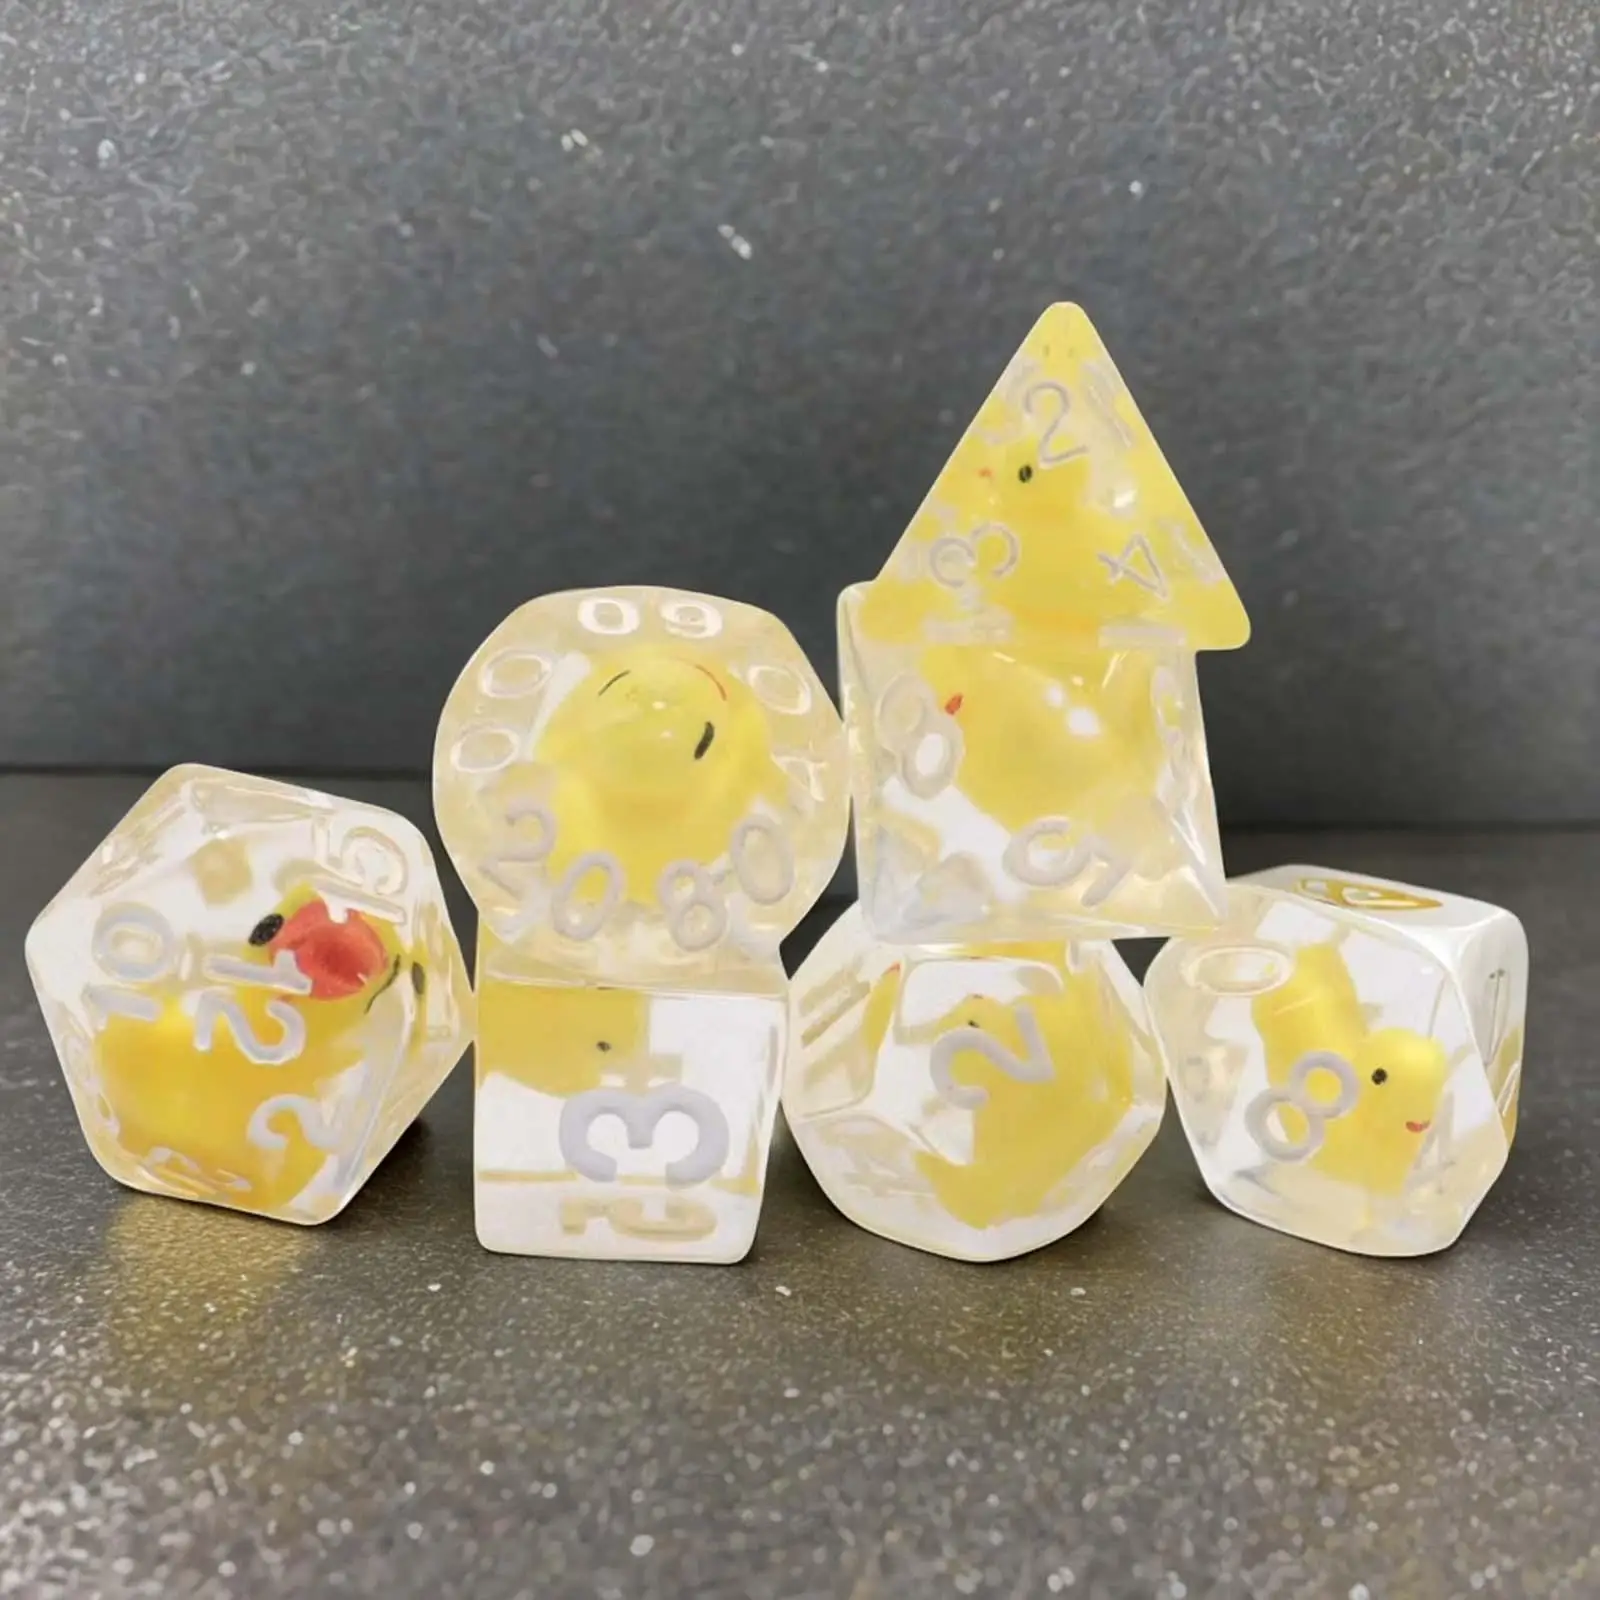 7x Acrylic Polyhedral Dices Set D4-D40 Multi Sided Dices Filled with Ducks Animal Board Game Props for KTV Party Table Game